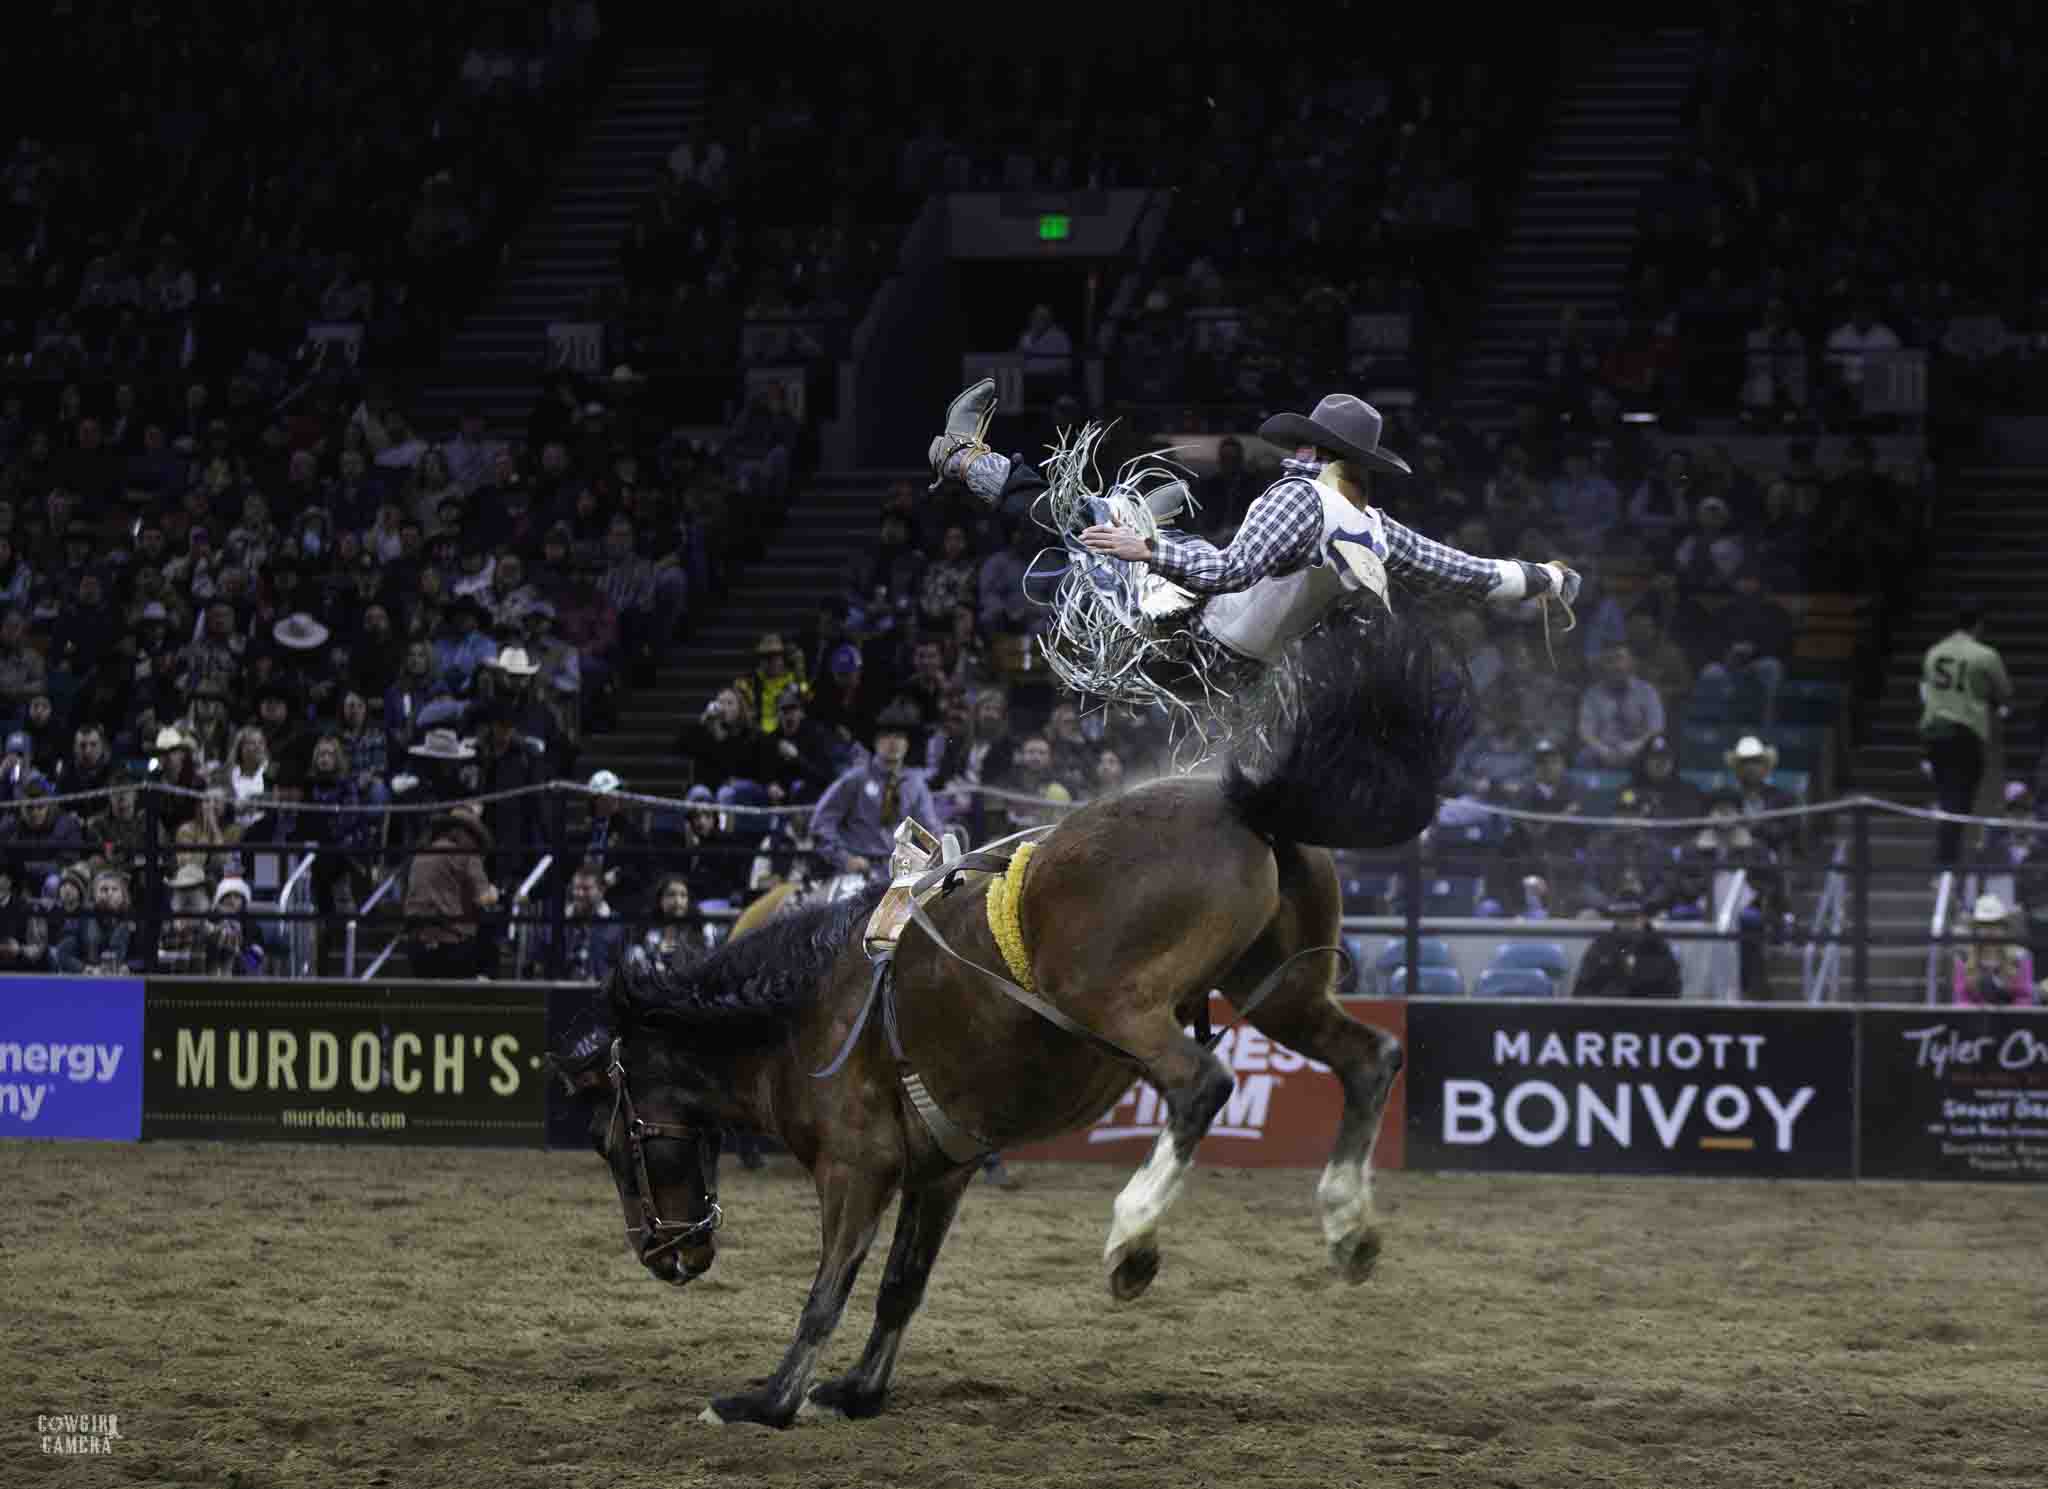 Bronc Rider getting bucked off and bouncing on the horse's butt with his butt as he's falling